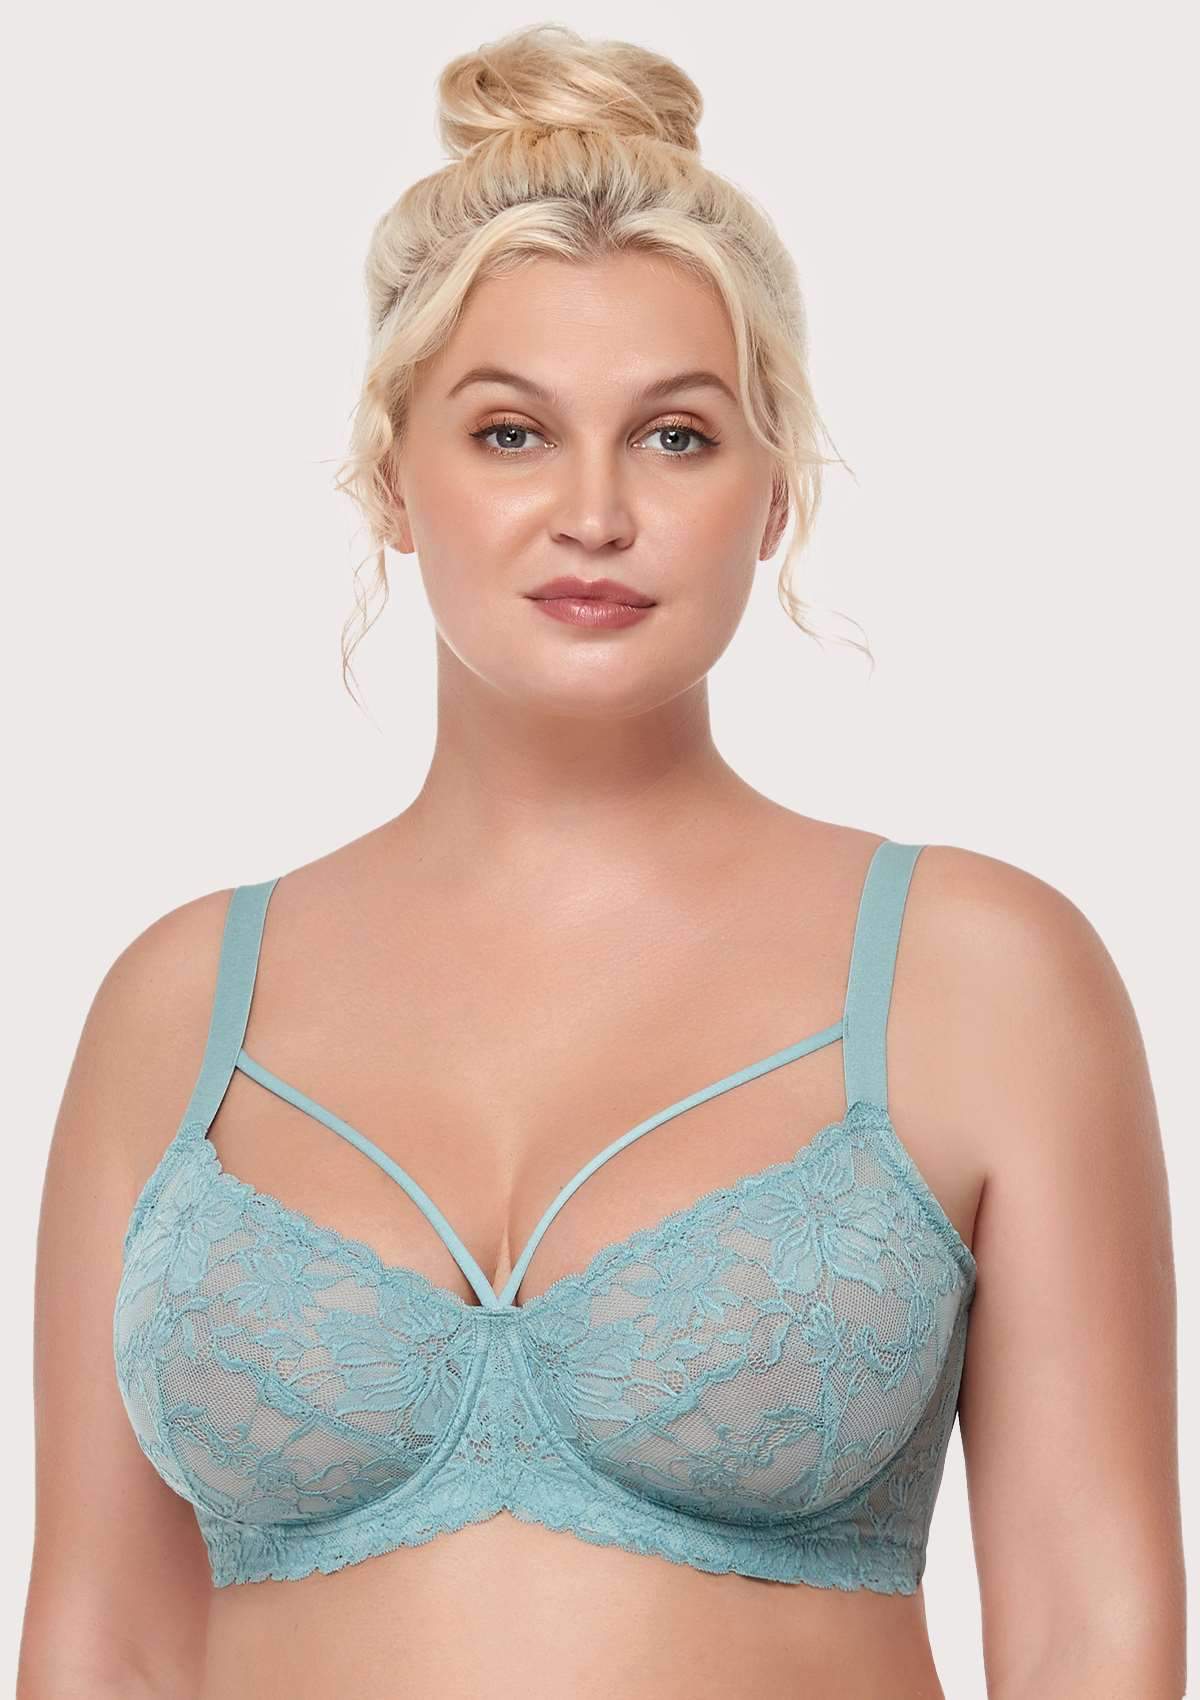 HSIA Pretty In Petals Unlined Lace Bra: Comfortable And Supportive Bra - Crystal Blue / 34 / C